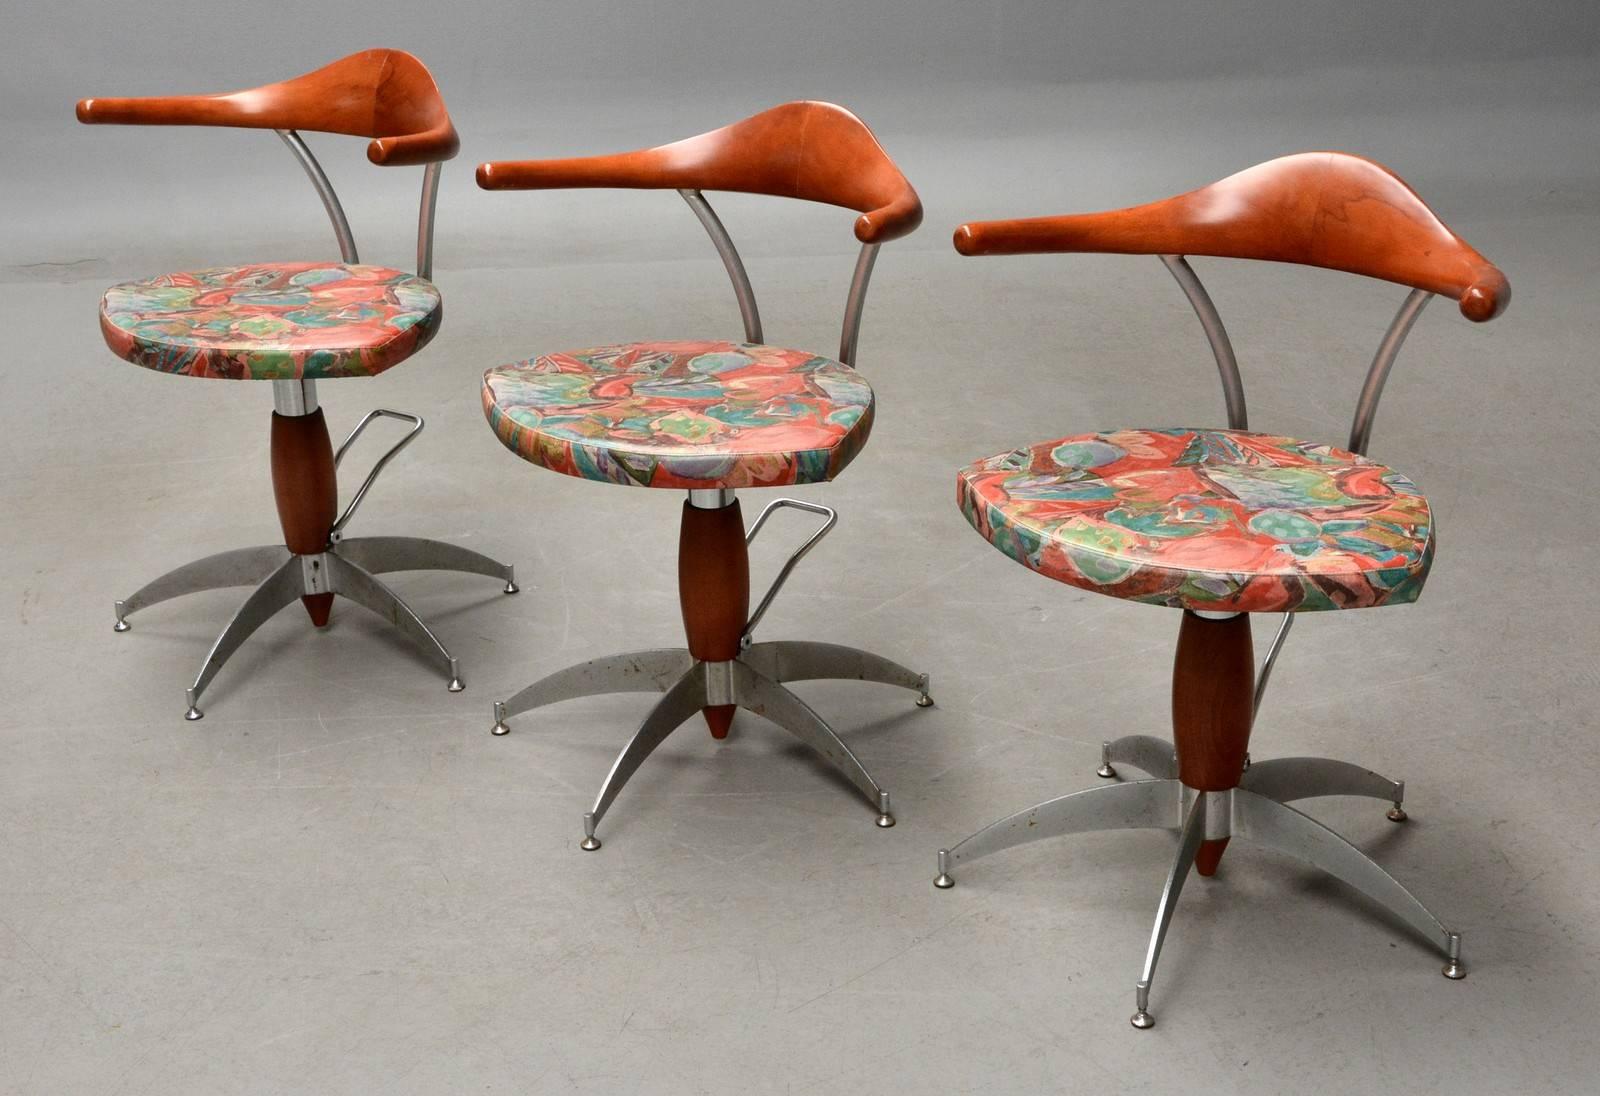 Hairdressing chairs upholstered with a floral artificial material, headpiece, and stem of cherry-beech wood, steel base, adjustable height pedal for adjustment.
Used condition, including rust on the frame.